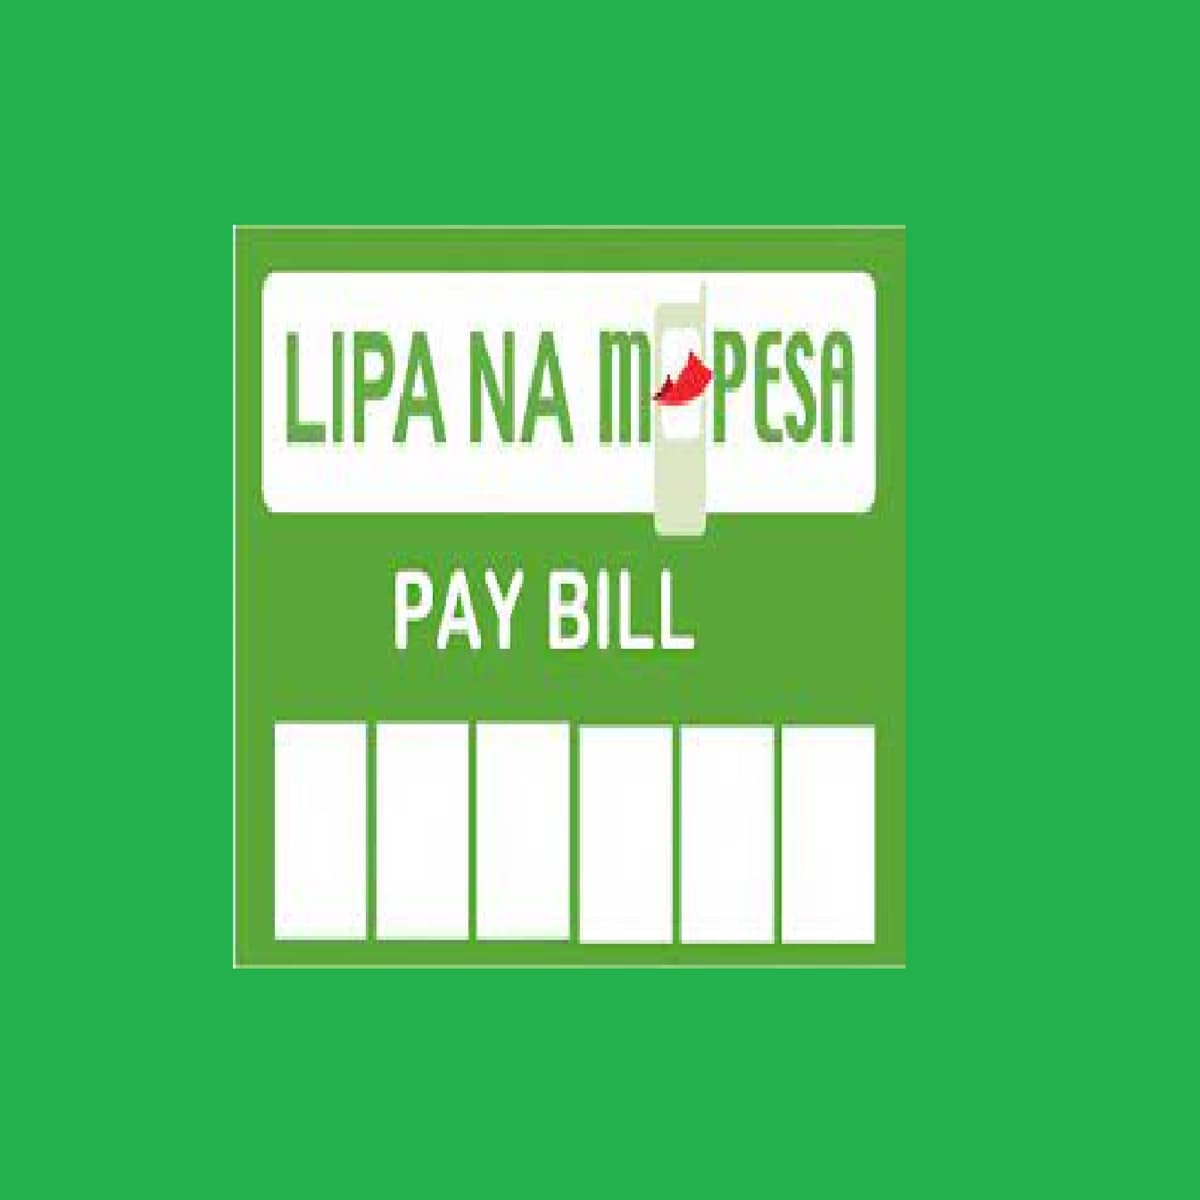 M-pesa Charges for Paybill